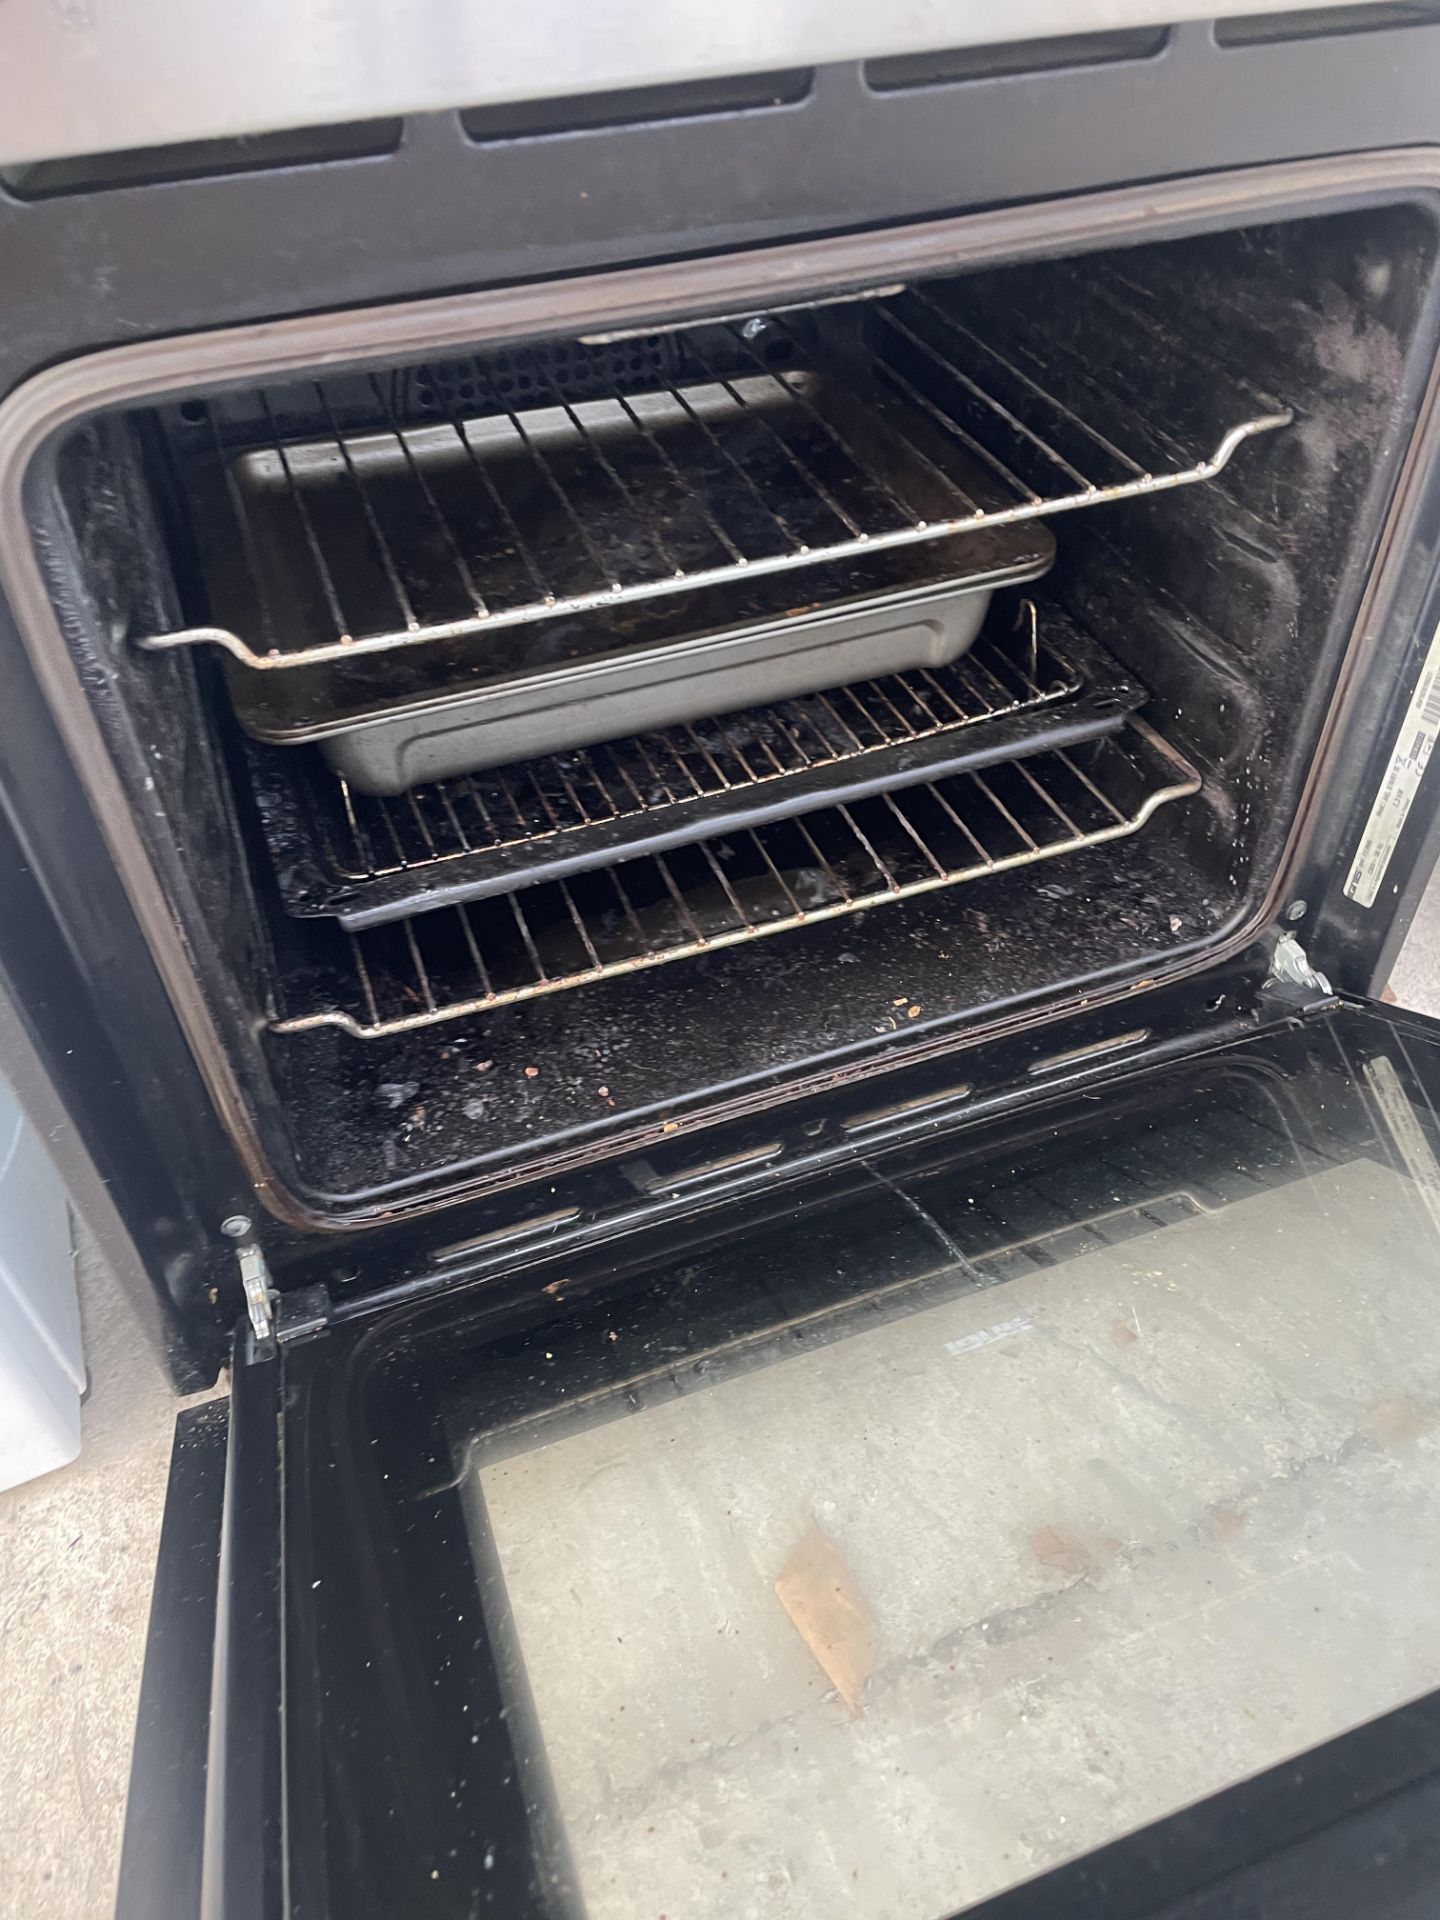 AN IGNIS INTERGRATED ELECTRIC OVEN - Image 3 of 3